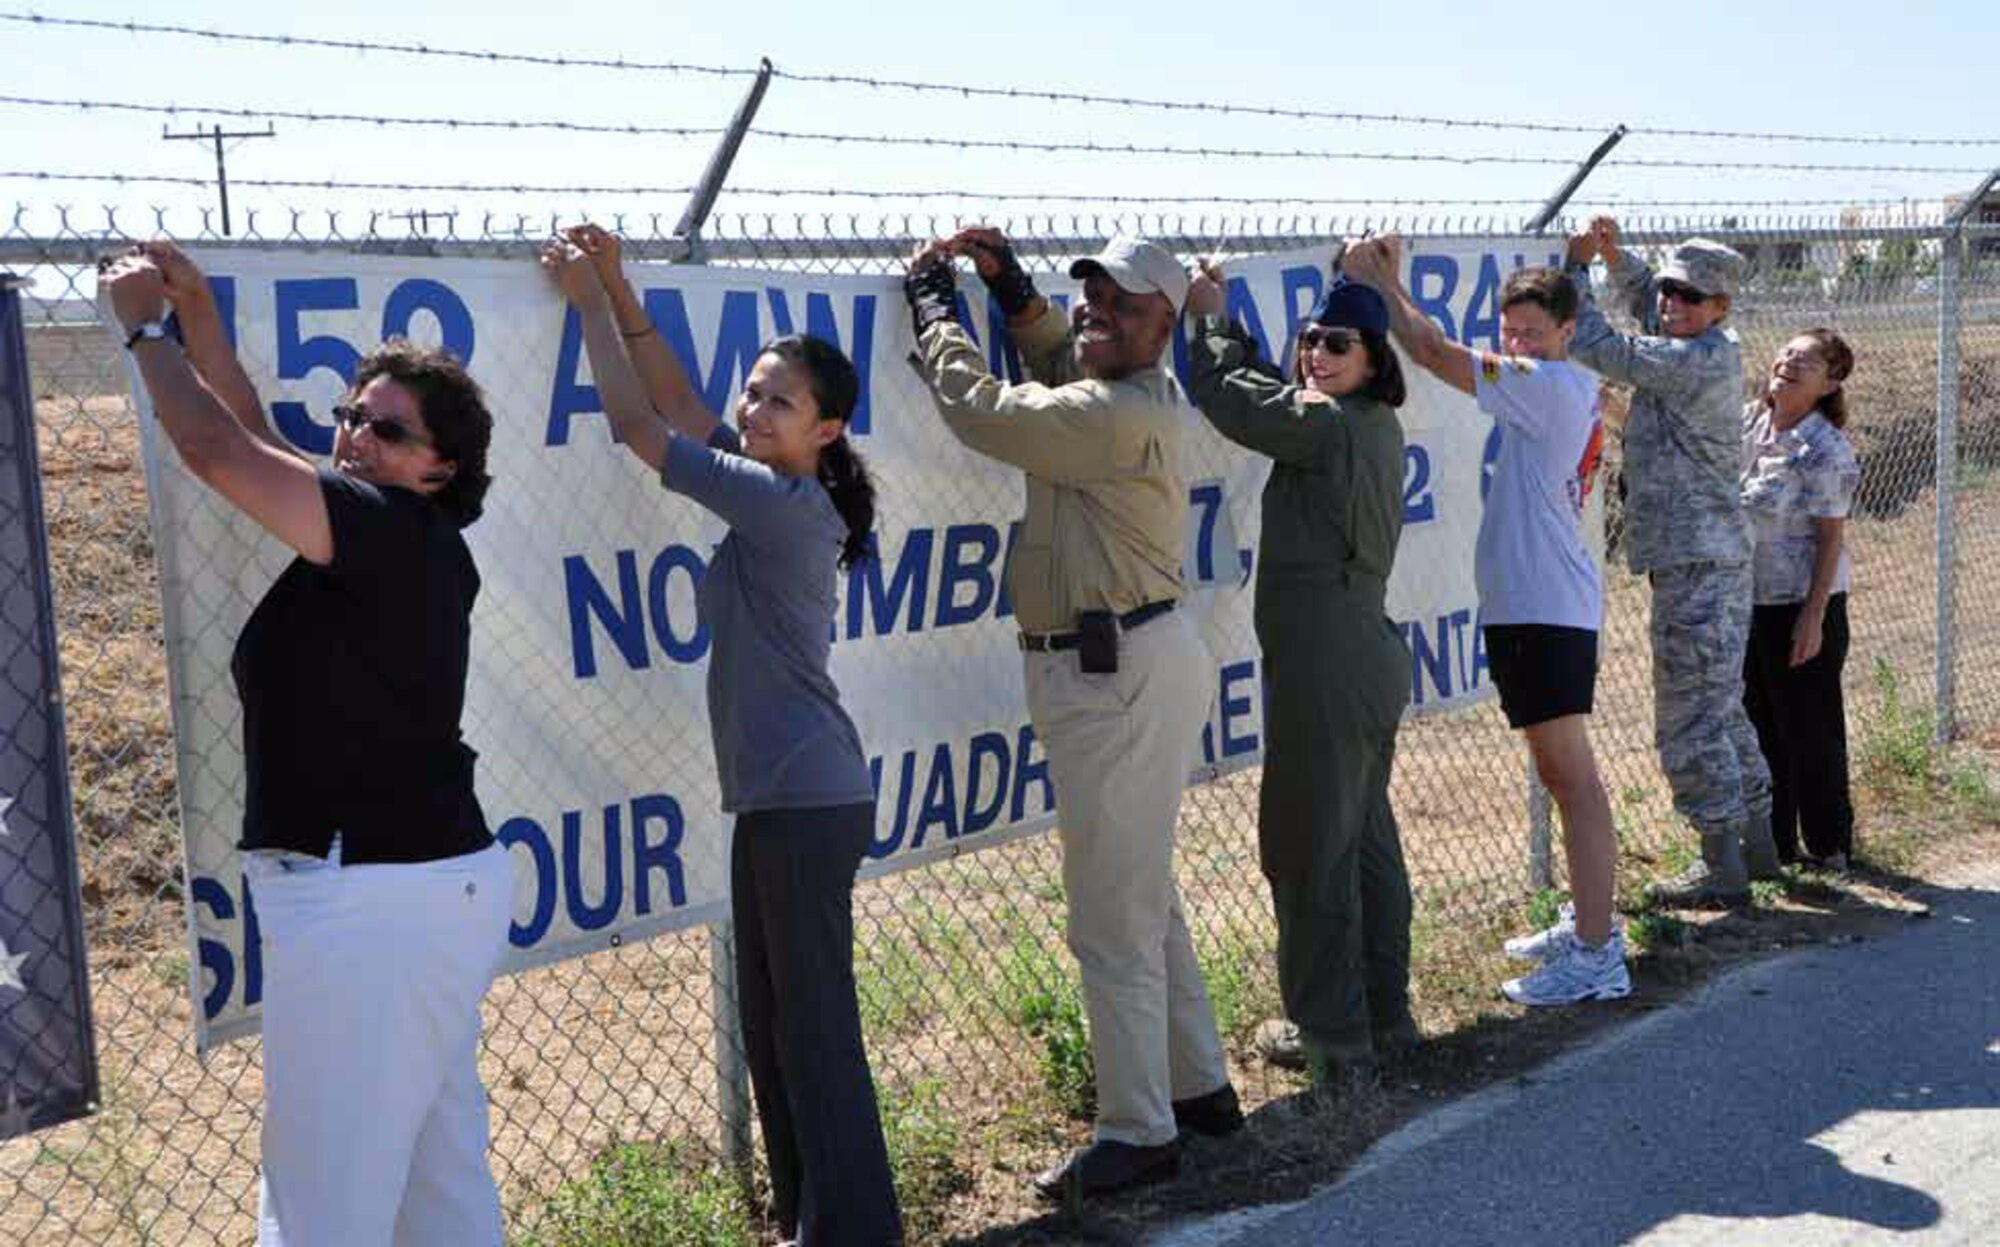 Members of the March Military Ball committee hang their banner on the perimeter fence facing the entrance of March Air Reserve Base. The hanging of the banner, kicks-off ticket sales for the 452d AMW Military Ball, which will be held Nov. 17. The 452d AMW Military Ball committee members pictured from left to right: Chief Master Sgt. Sylvia Frausto, 452nd Force Support Squadron, Master Sgt. Carolyn Erfe, 4th Combat Camera Squadron, Kirby Love, 4th CTCS, Senior Master Sgt. Josephine
Carrillo, 452nd Aeromedical Squadron, Tech. Sgt. Mary Johanson, 4th CTCS, Chief Master Sgt. Karen Krause, 452nd Maintenance Operations Squadron and Elaine Plein, 452nd Air Mobility Wing. (U.S. Air Force photo by Darnell Gardner)